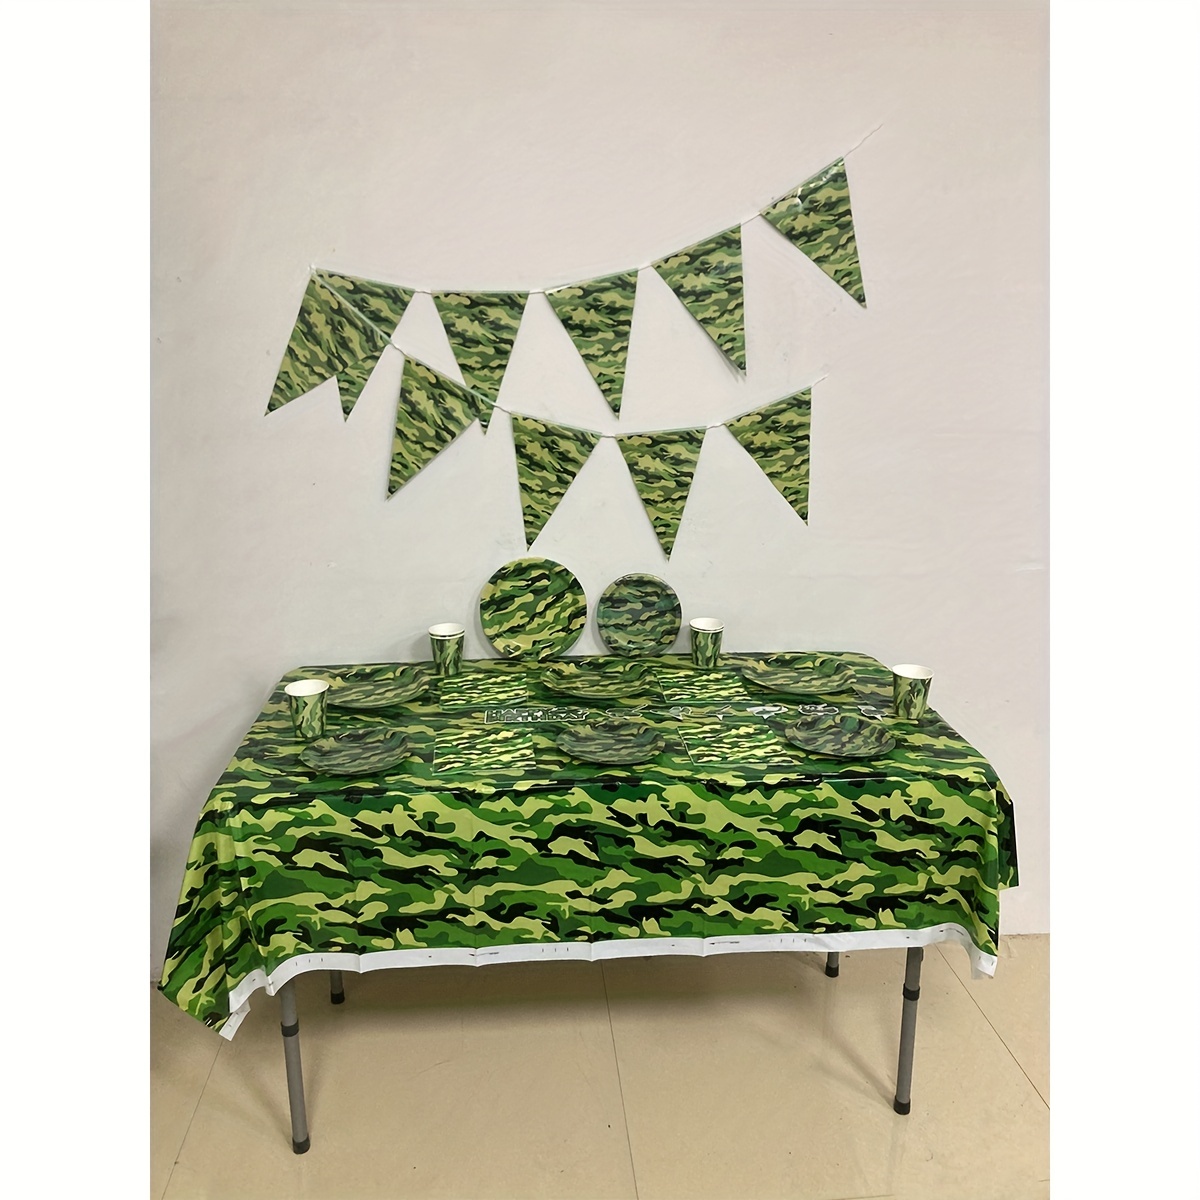 Camouflage Theme Party Decorations Army Camo Netting Banner parachute Ballon  Baby Shower Kids Military Birthday Party